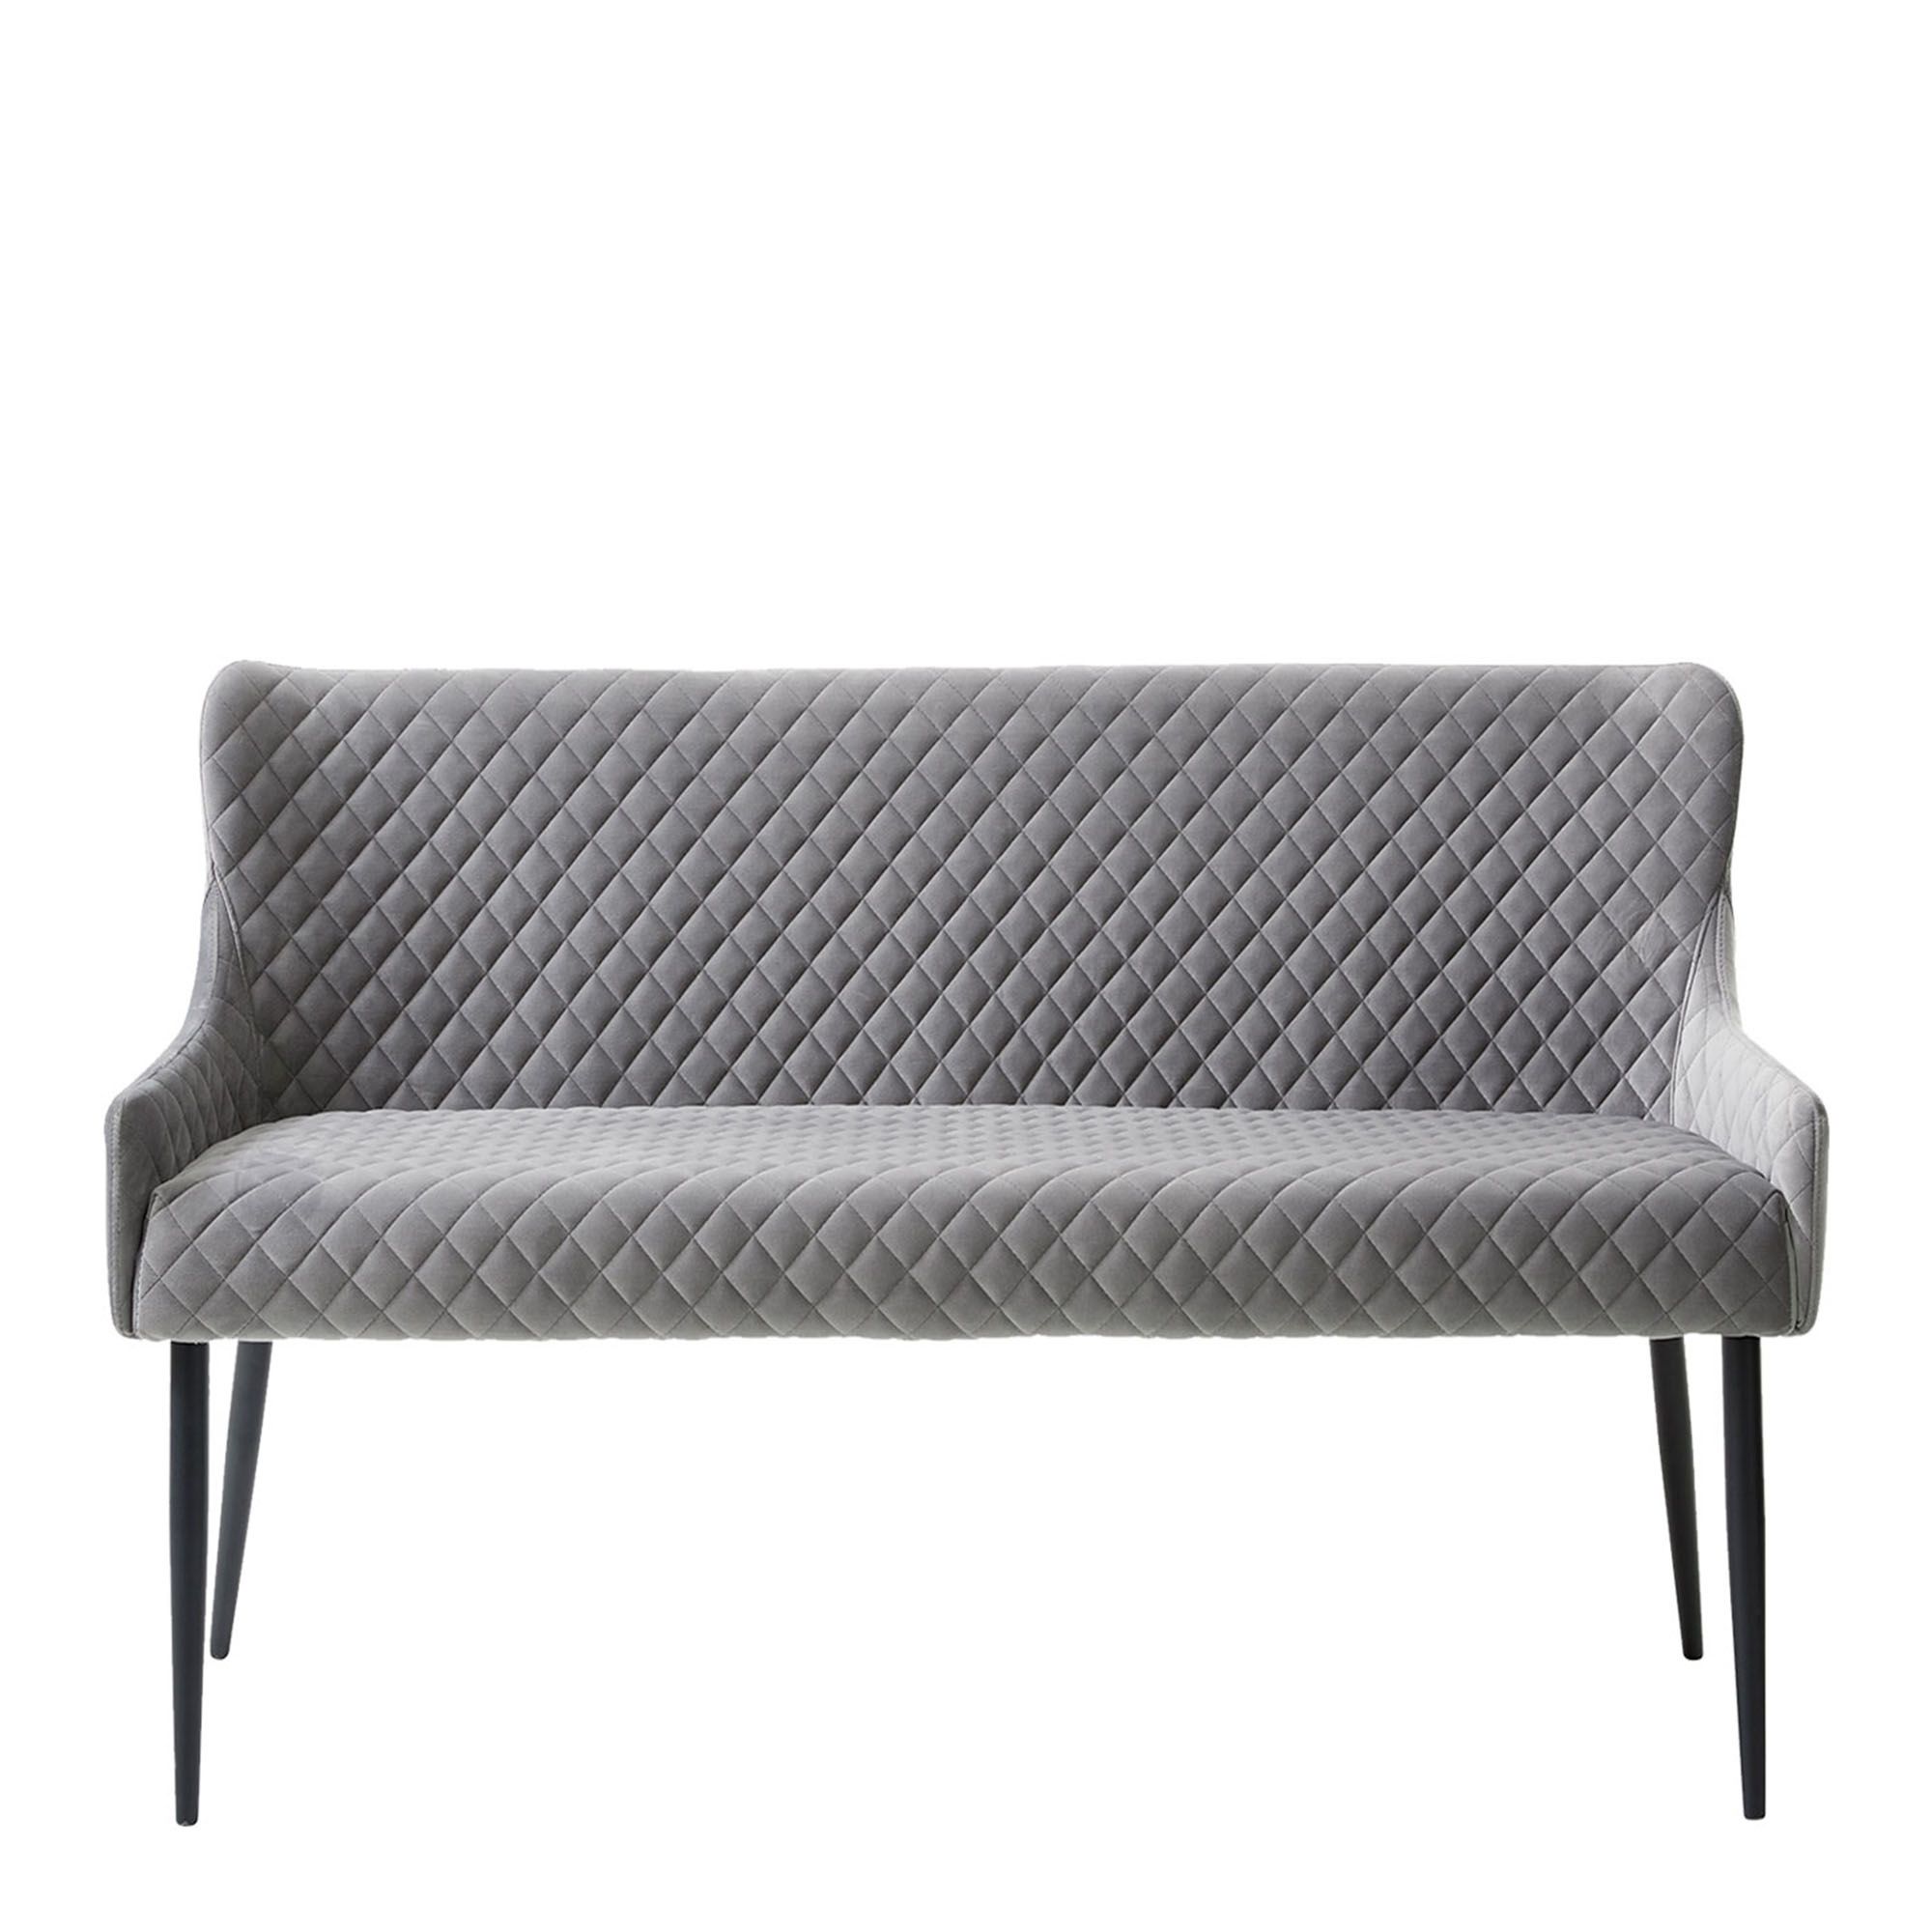 Copeland – Sofa Bench In Grey Velvet Fabric – Dining Chairs – Fishpools Within Rivet Gray Velvet Fabric Bench (Gallery 19 of 20)